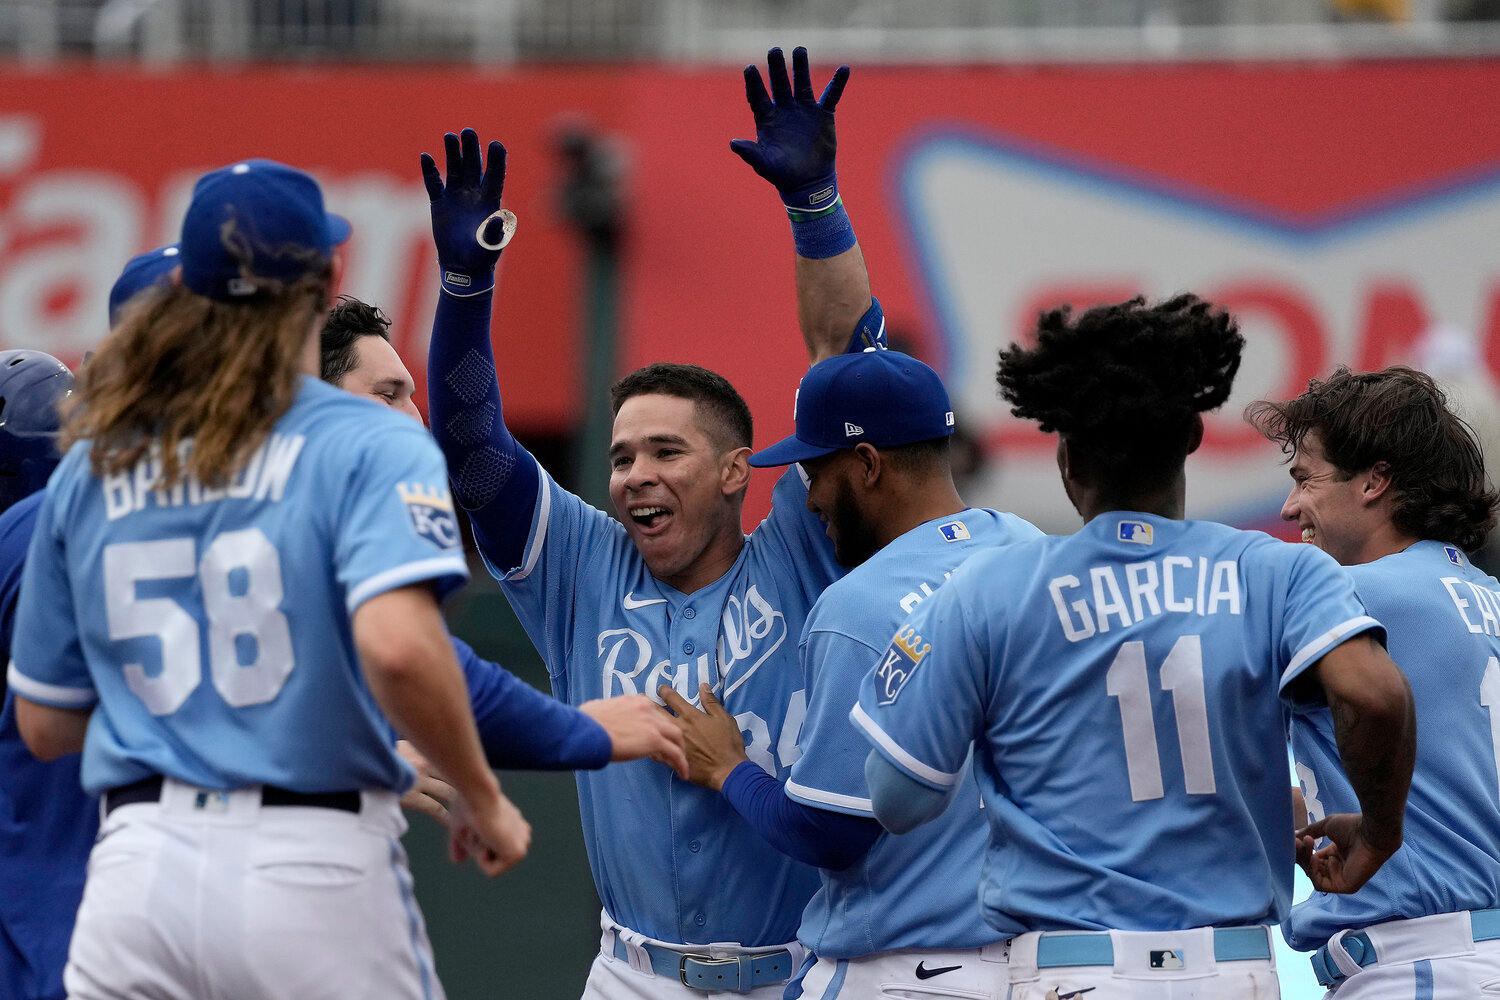 Kansas City Royals' Freddy Fermin (center) celebrates with teammates after their 4-3 victory over the Chicago White Sox on Thursday in Kansas City, Mo. (AP Photo/Charlie Riedel)